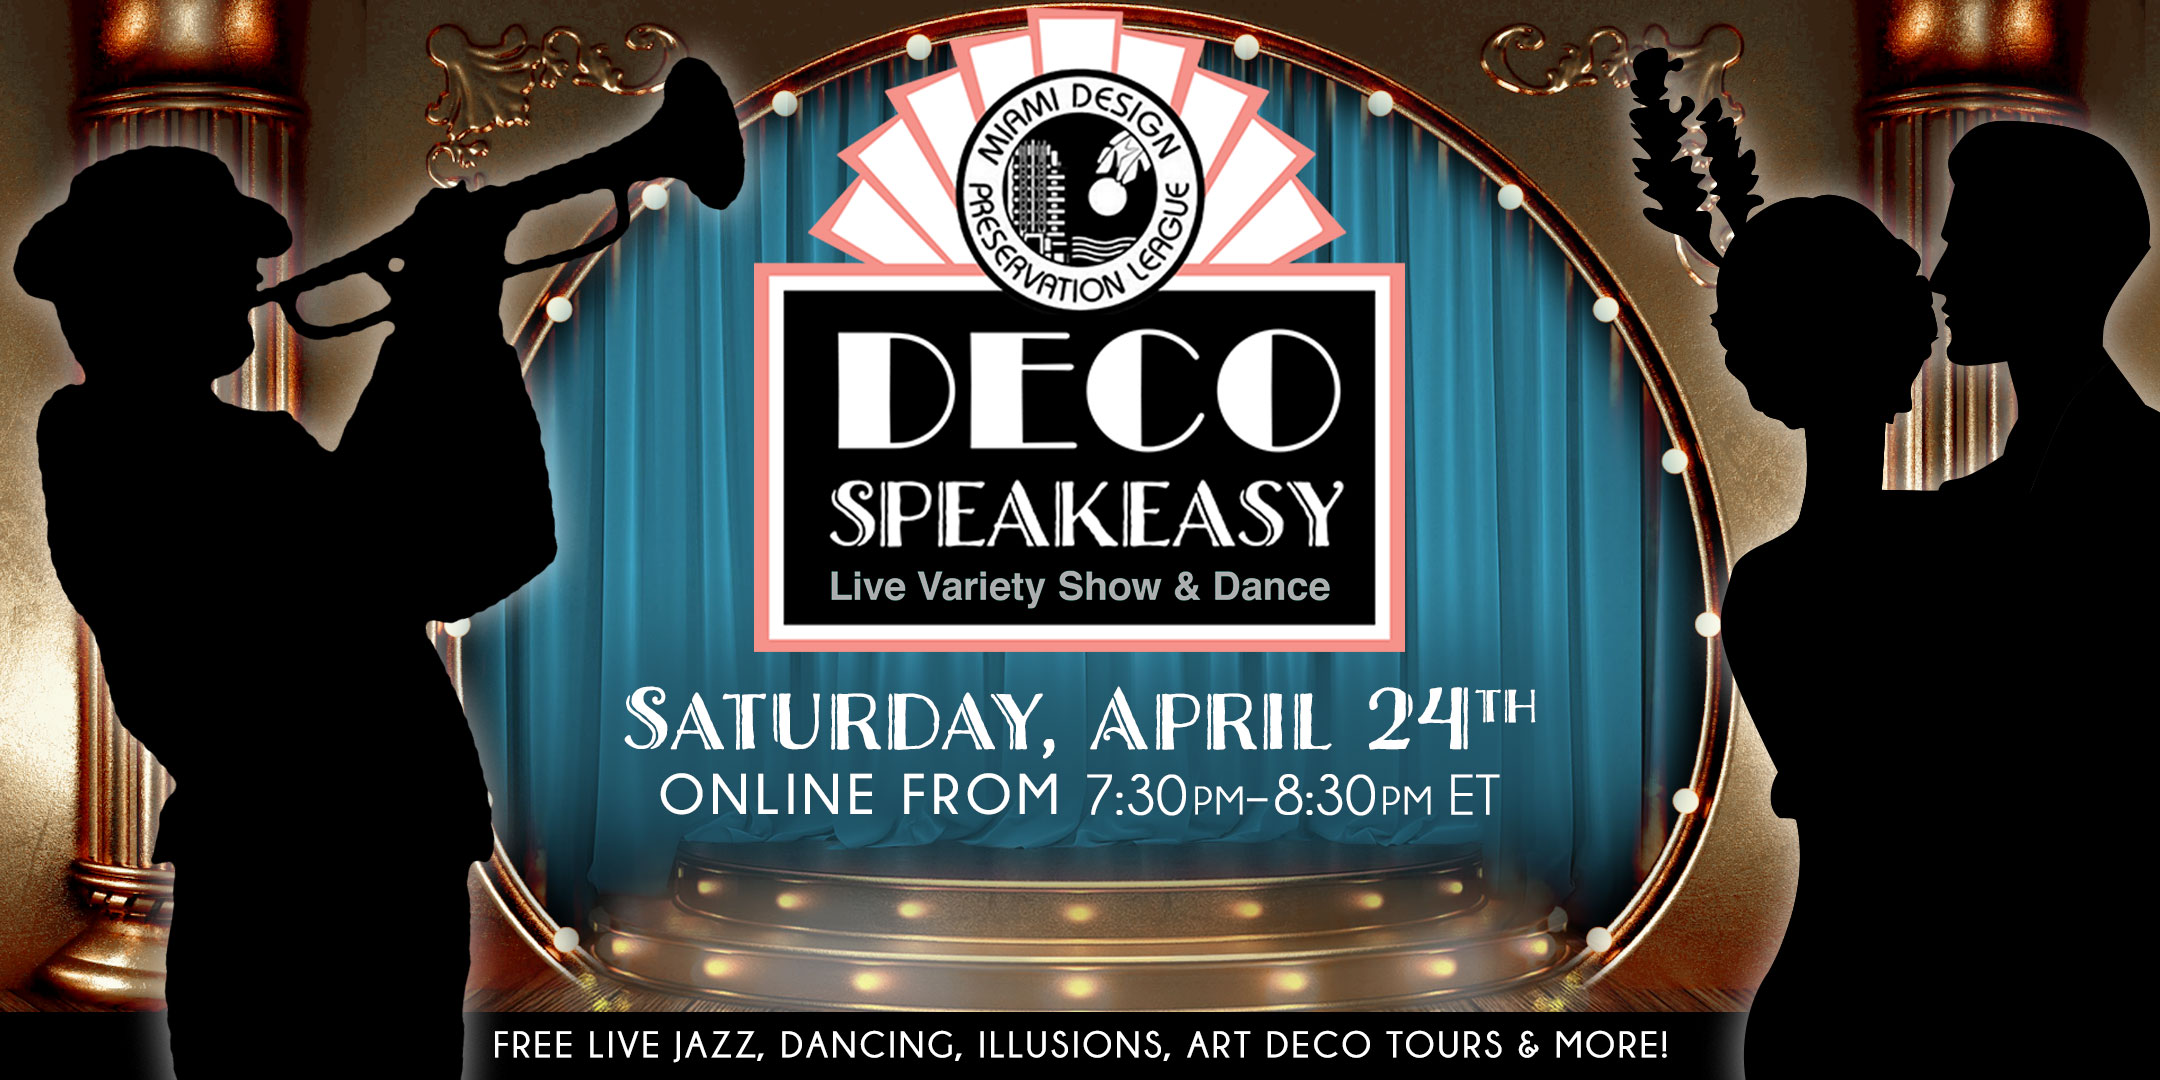 Celebrate World Art Deco Day with Miami Design Preservation League on a special Saturday edition of Deco Speakeasy! It's also National Jazz Appreciation Month, so dress up and dance, grab a cocktail or mocktail, and enjoy an hour of an interactive variety show with award-winning artists!